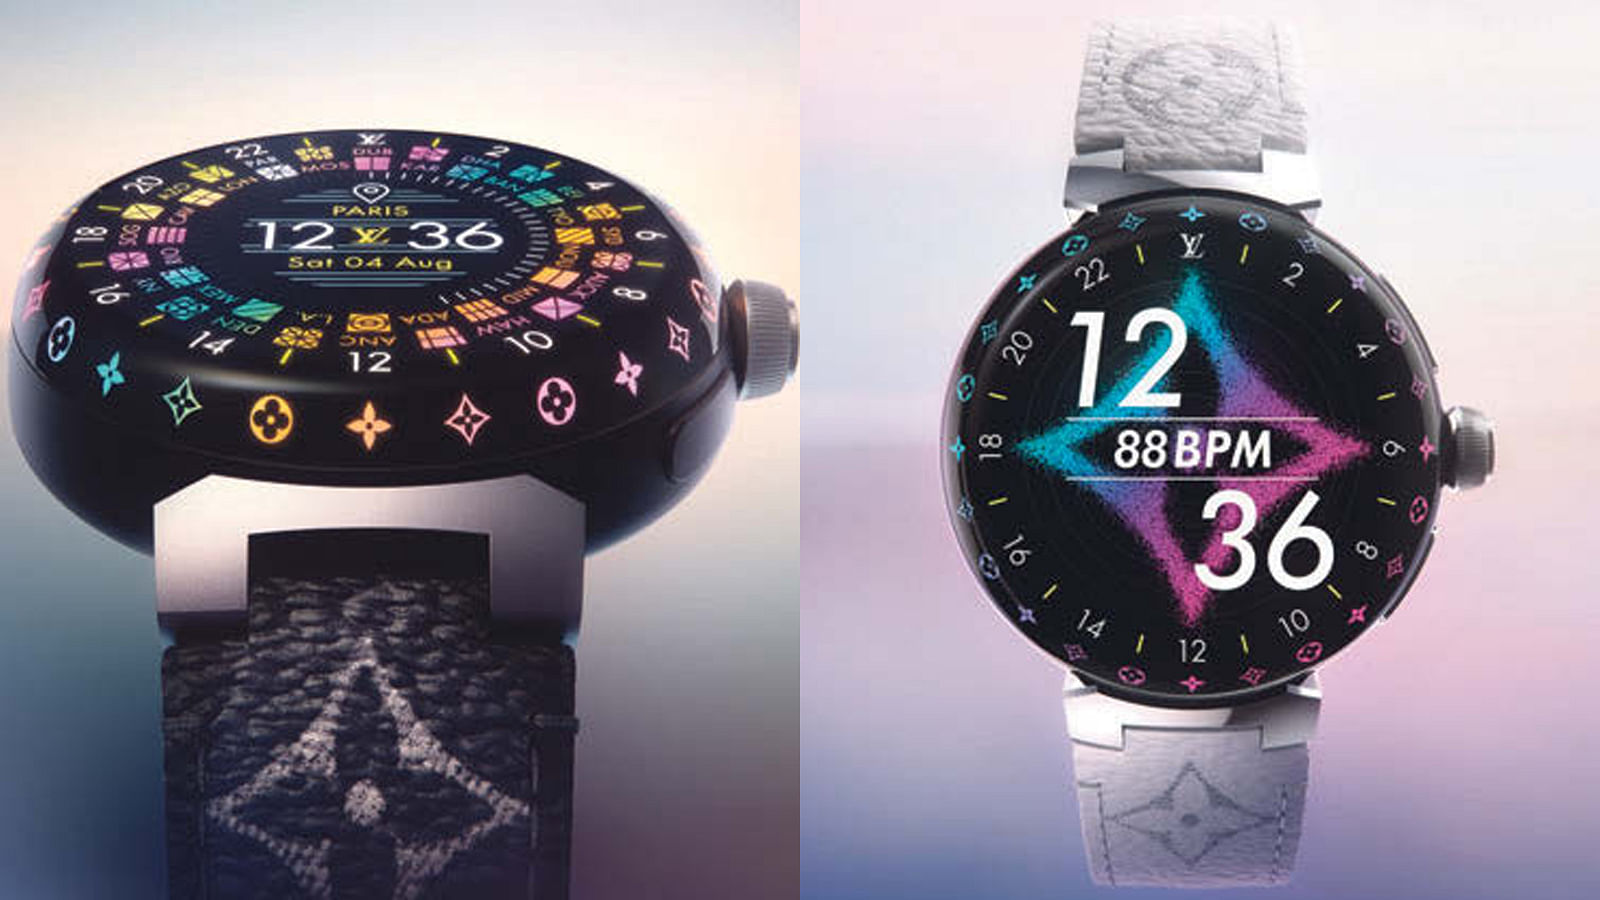 Louis Vuitton Presents Its Latest Connected Watch, The Tambour Horizon  Light Up